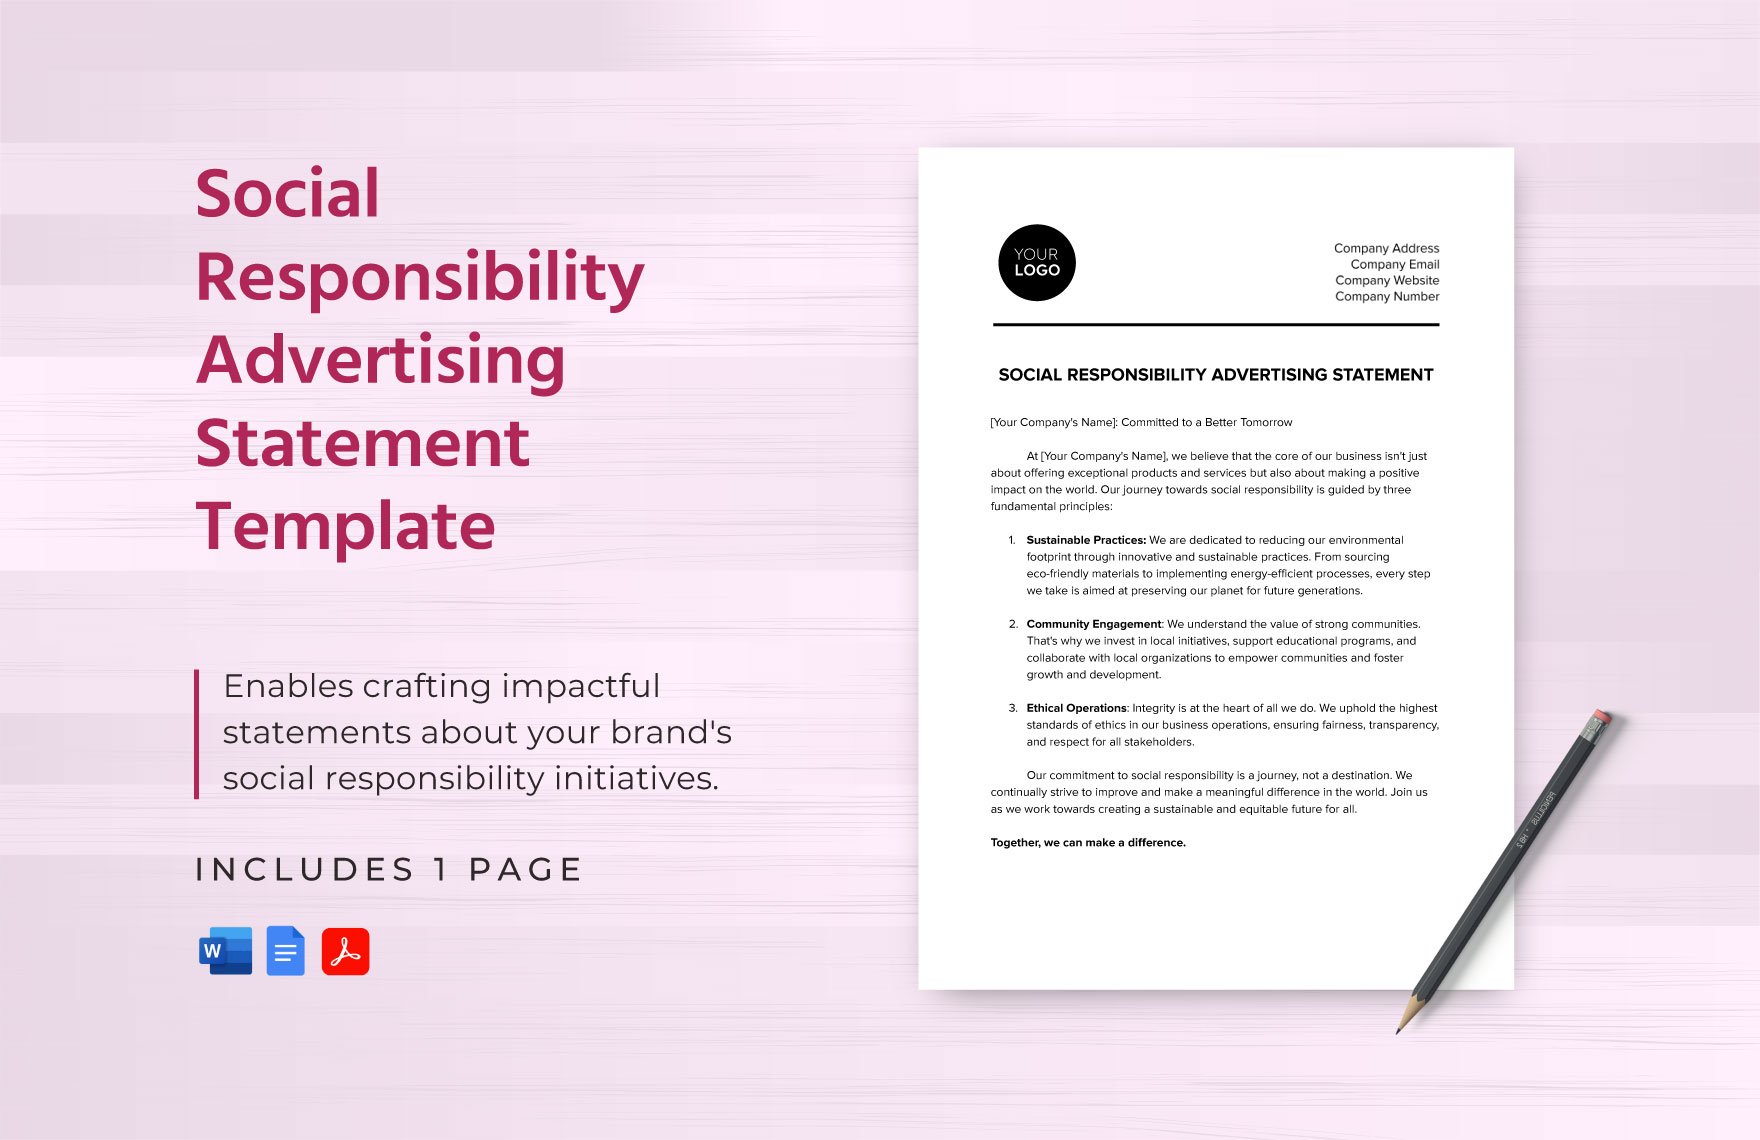 Social Responsibility Advertising Statement Template